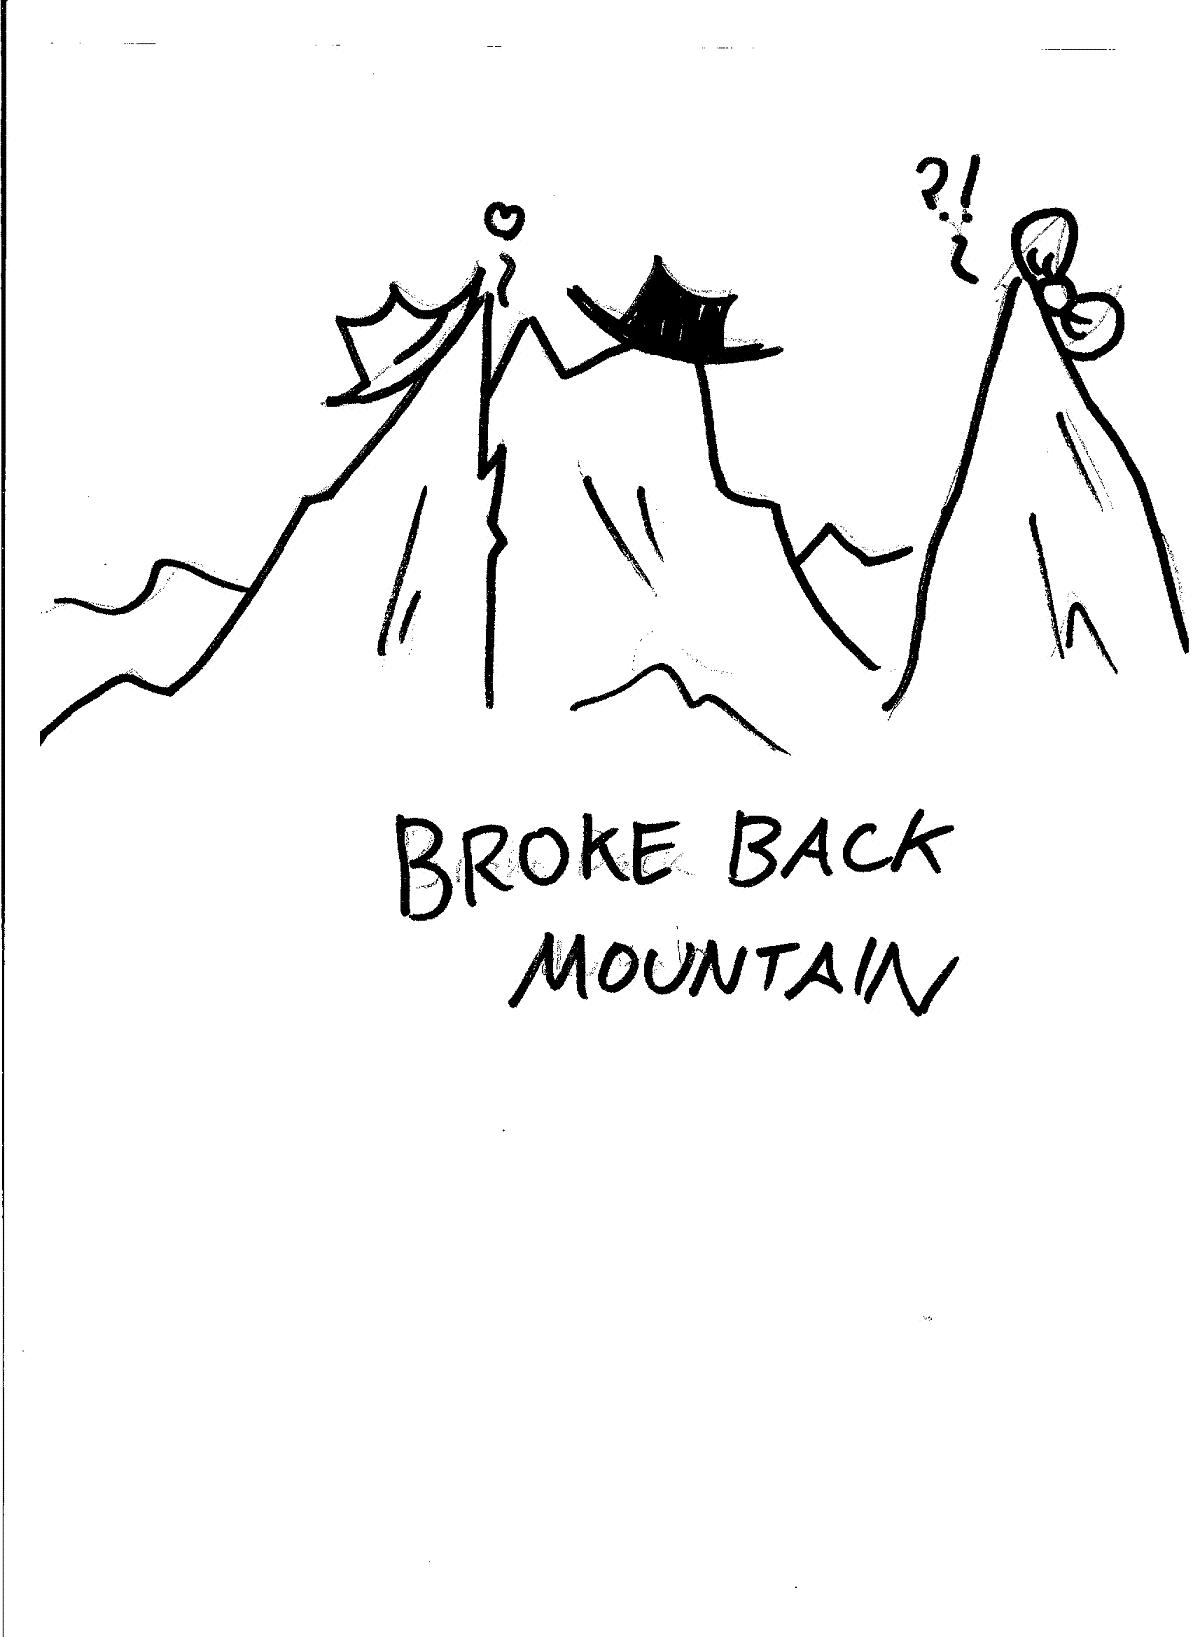 broke back mountain by NeVeRFoRgEt